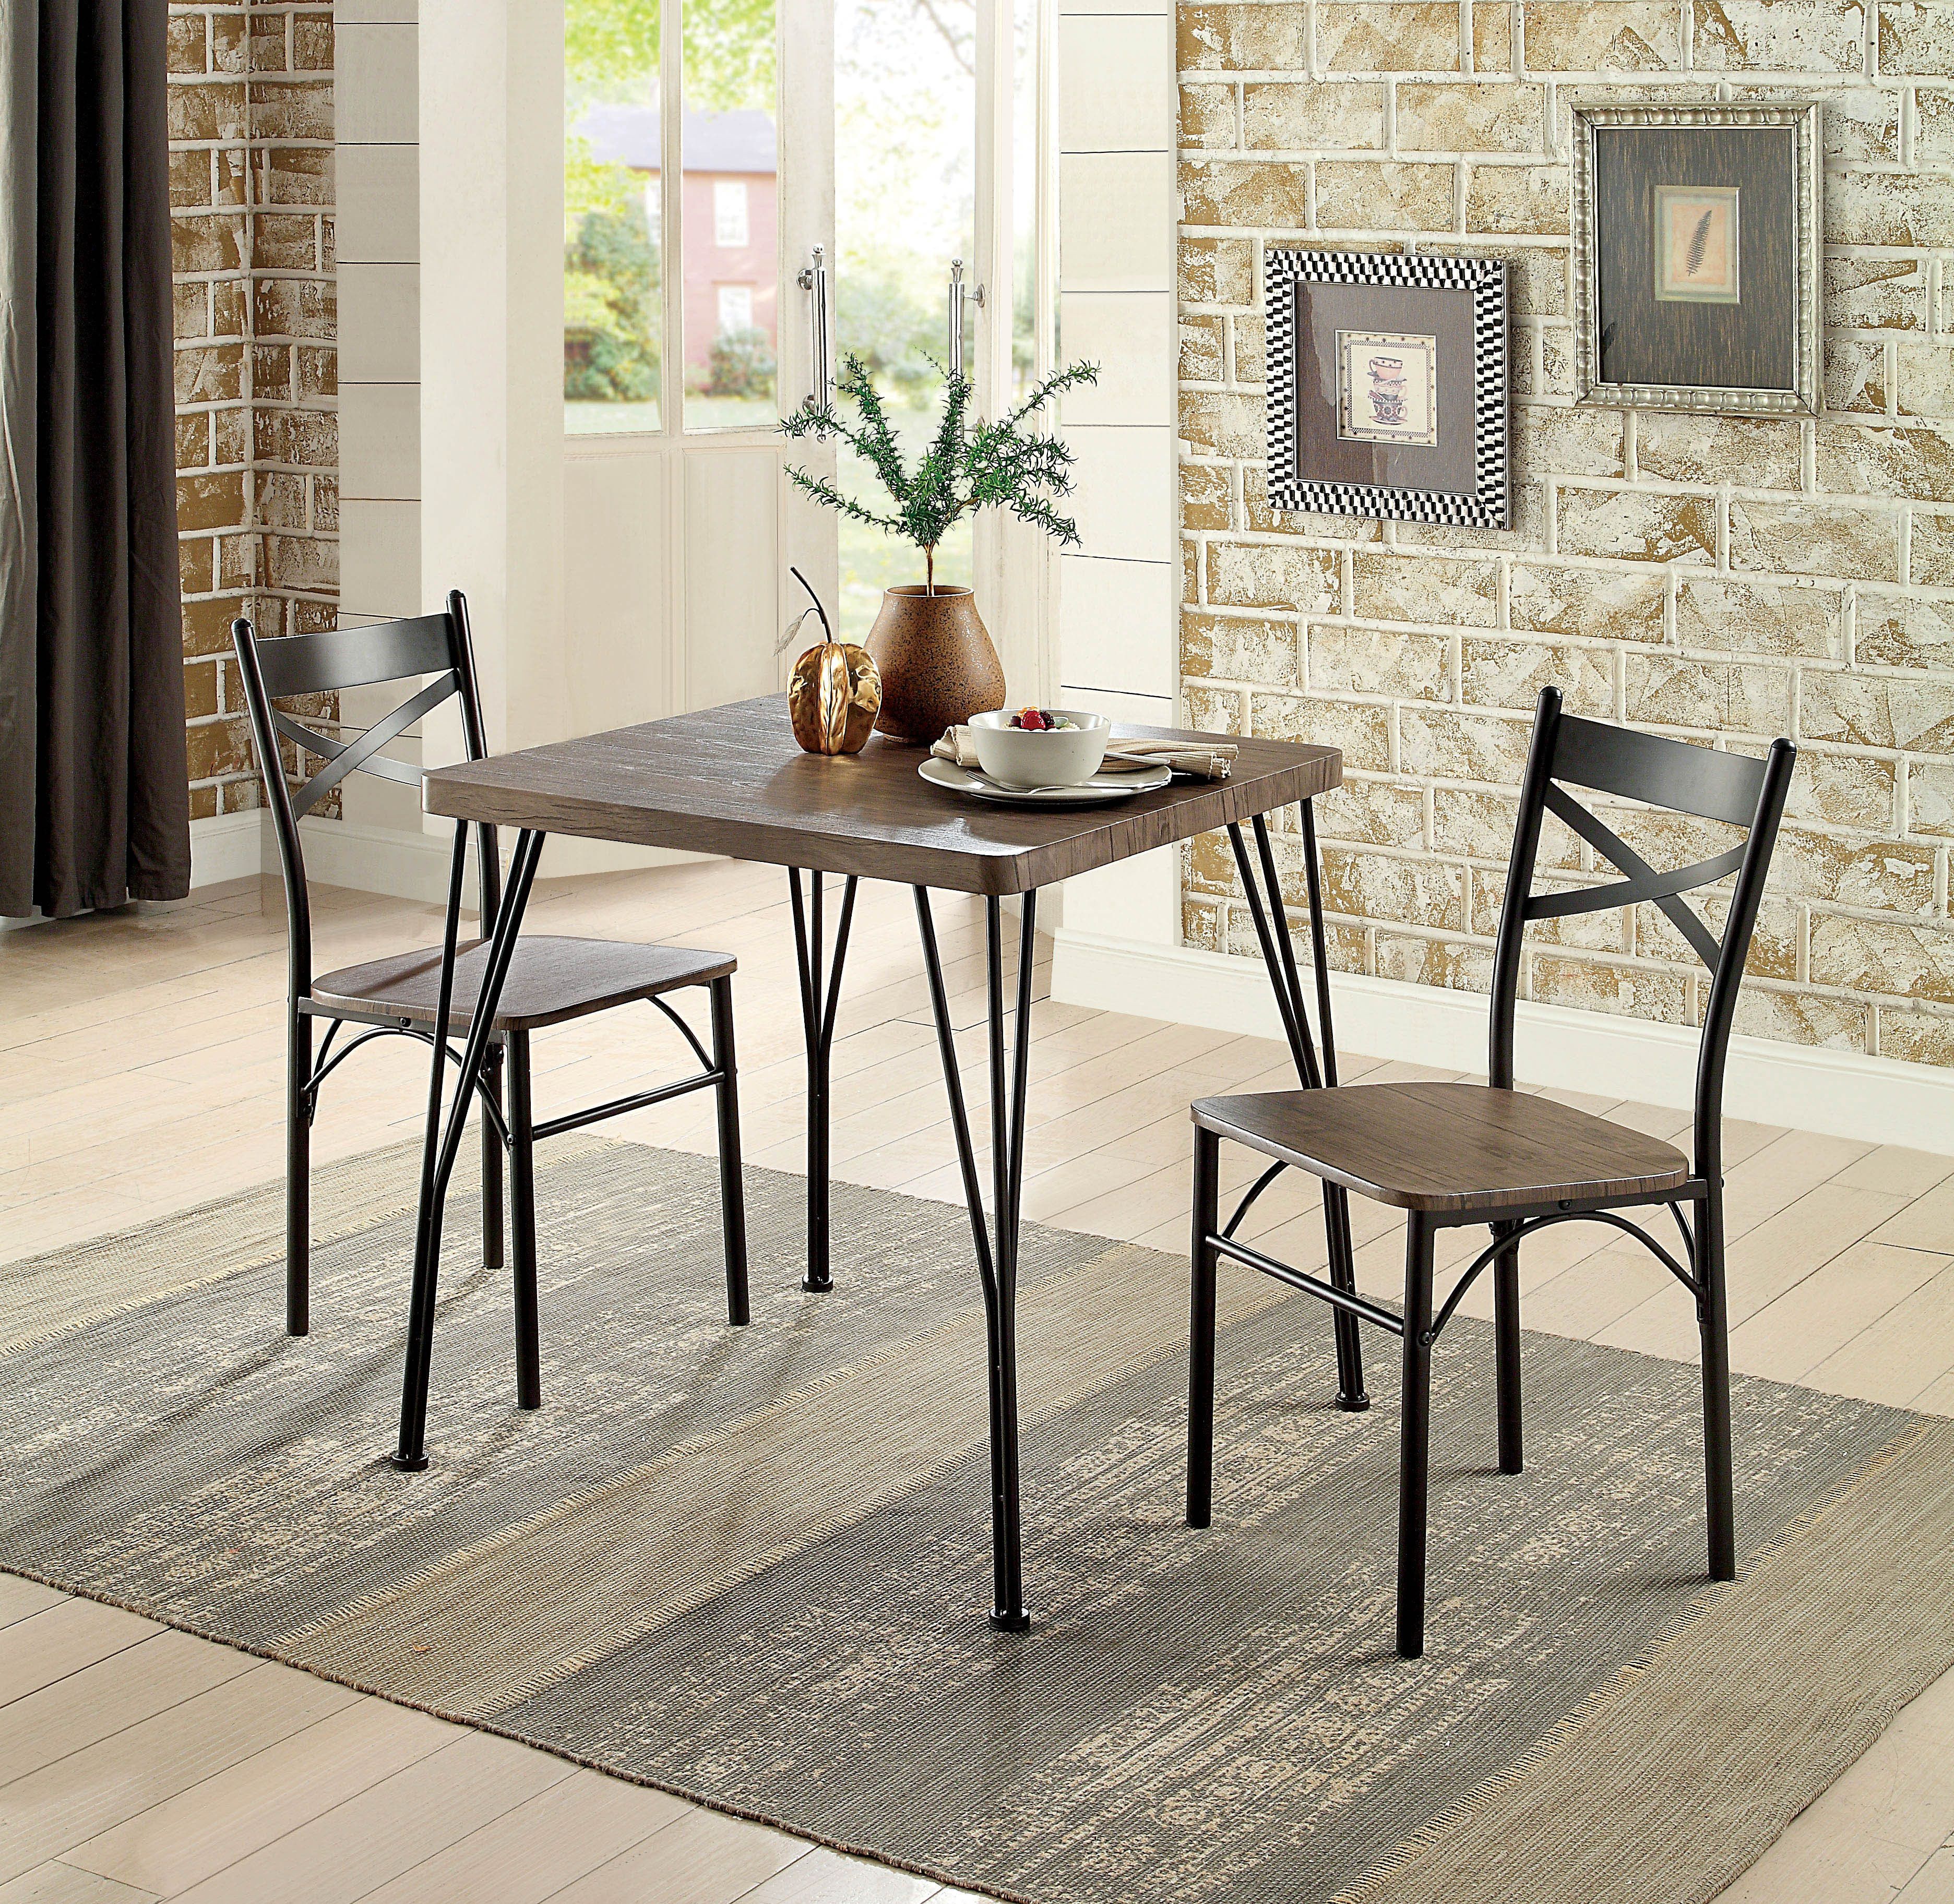 Guertin 3 Piece Dining Set Pertaining To 2018 Rossiter 3 Piece Dining Sets (Photo 7 of 20)